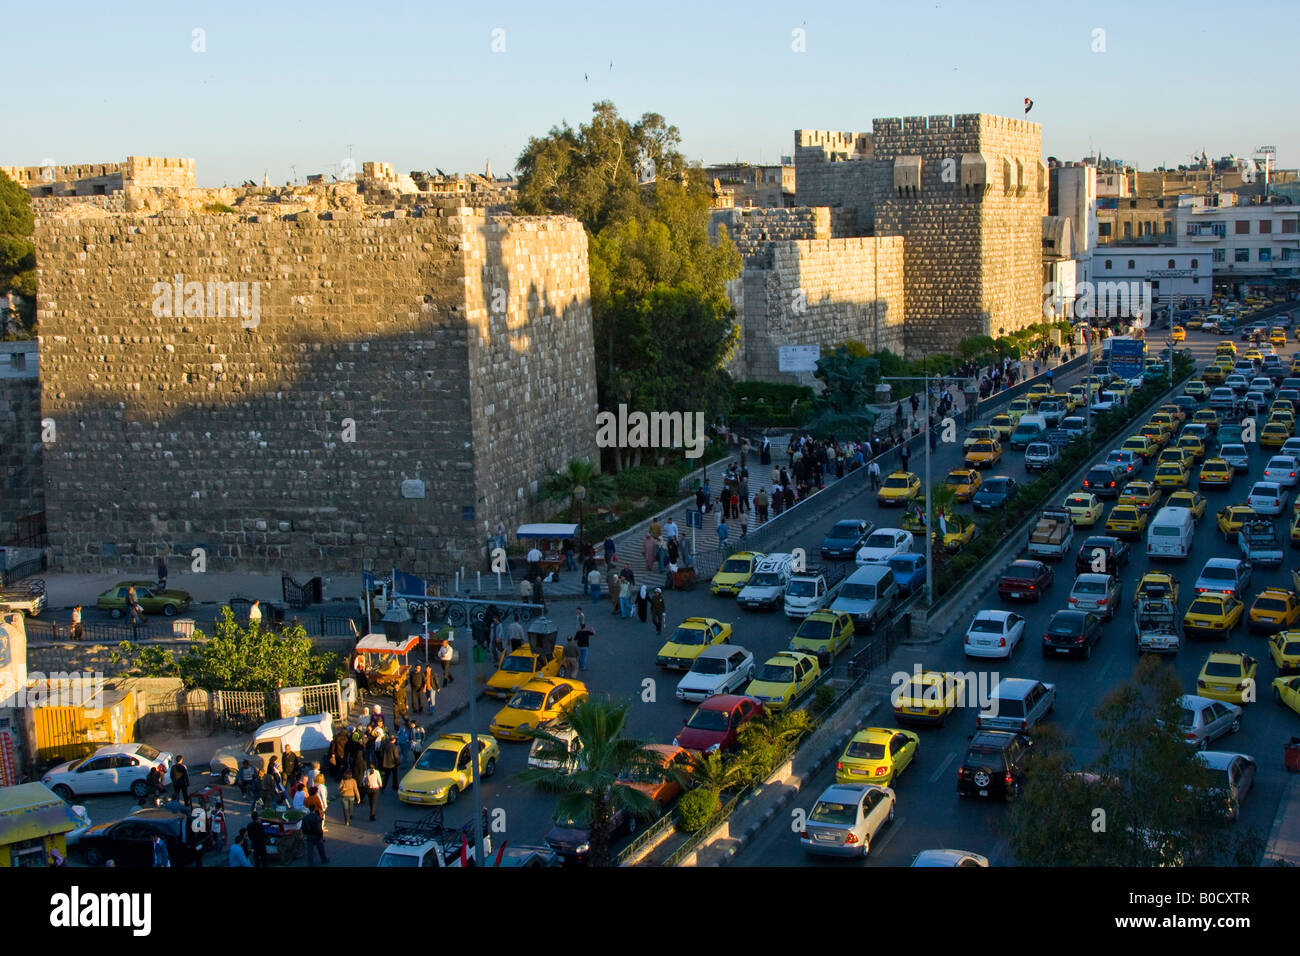 Crowded Street Outside the Citadel of the Old City in Damascus Syria Stock Photo